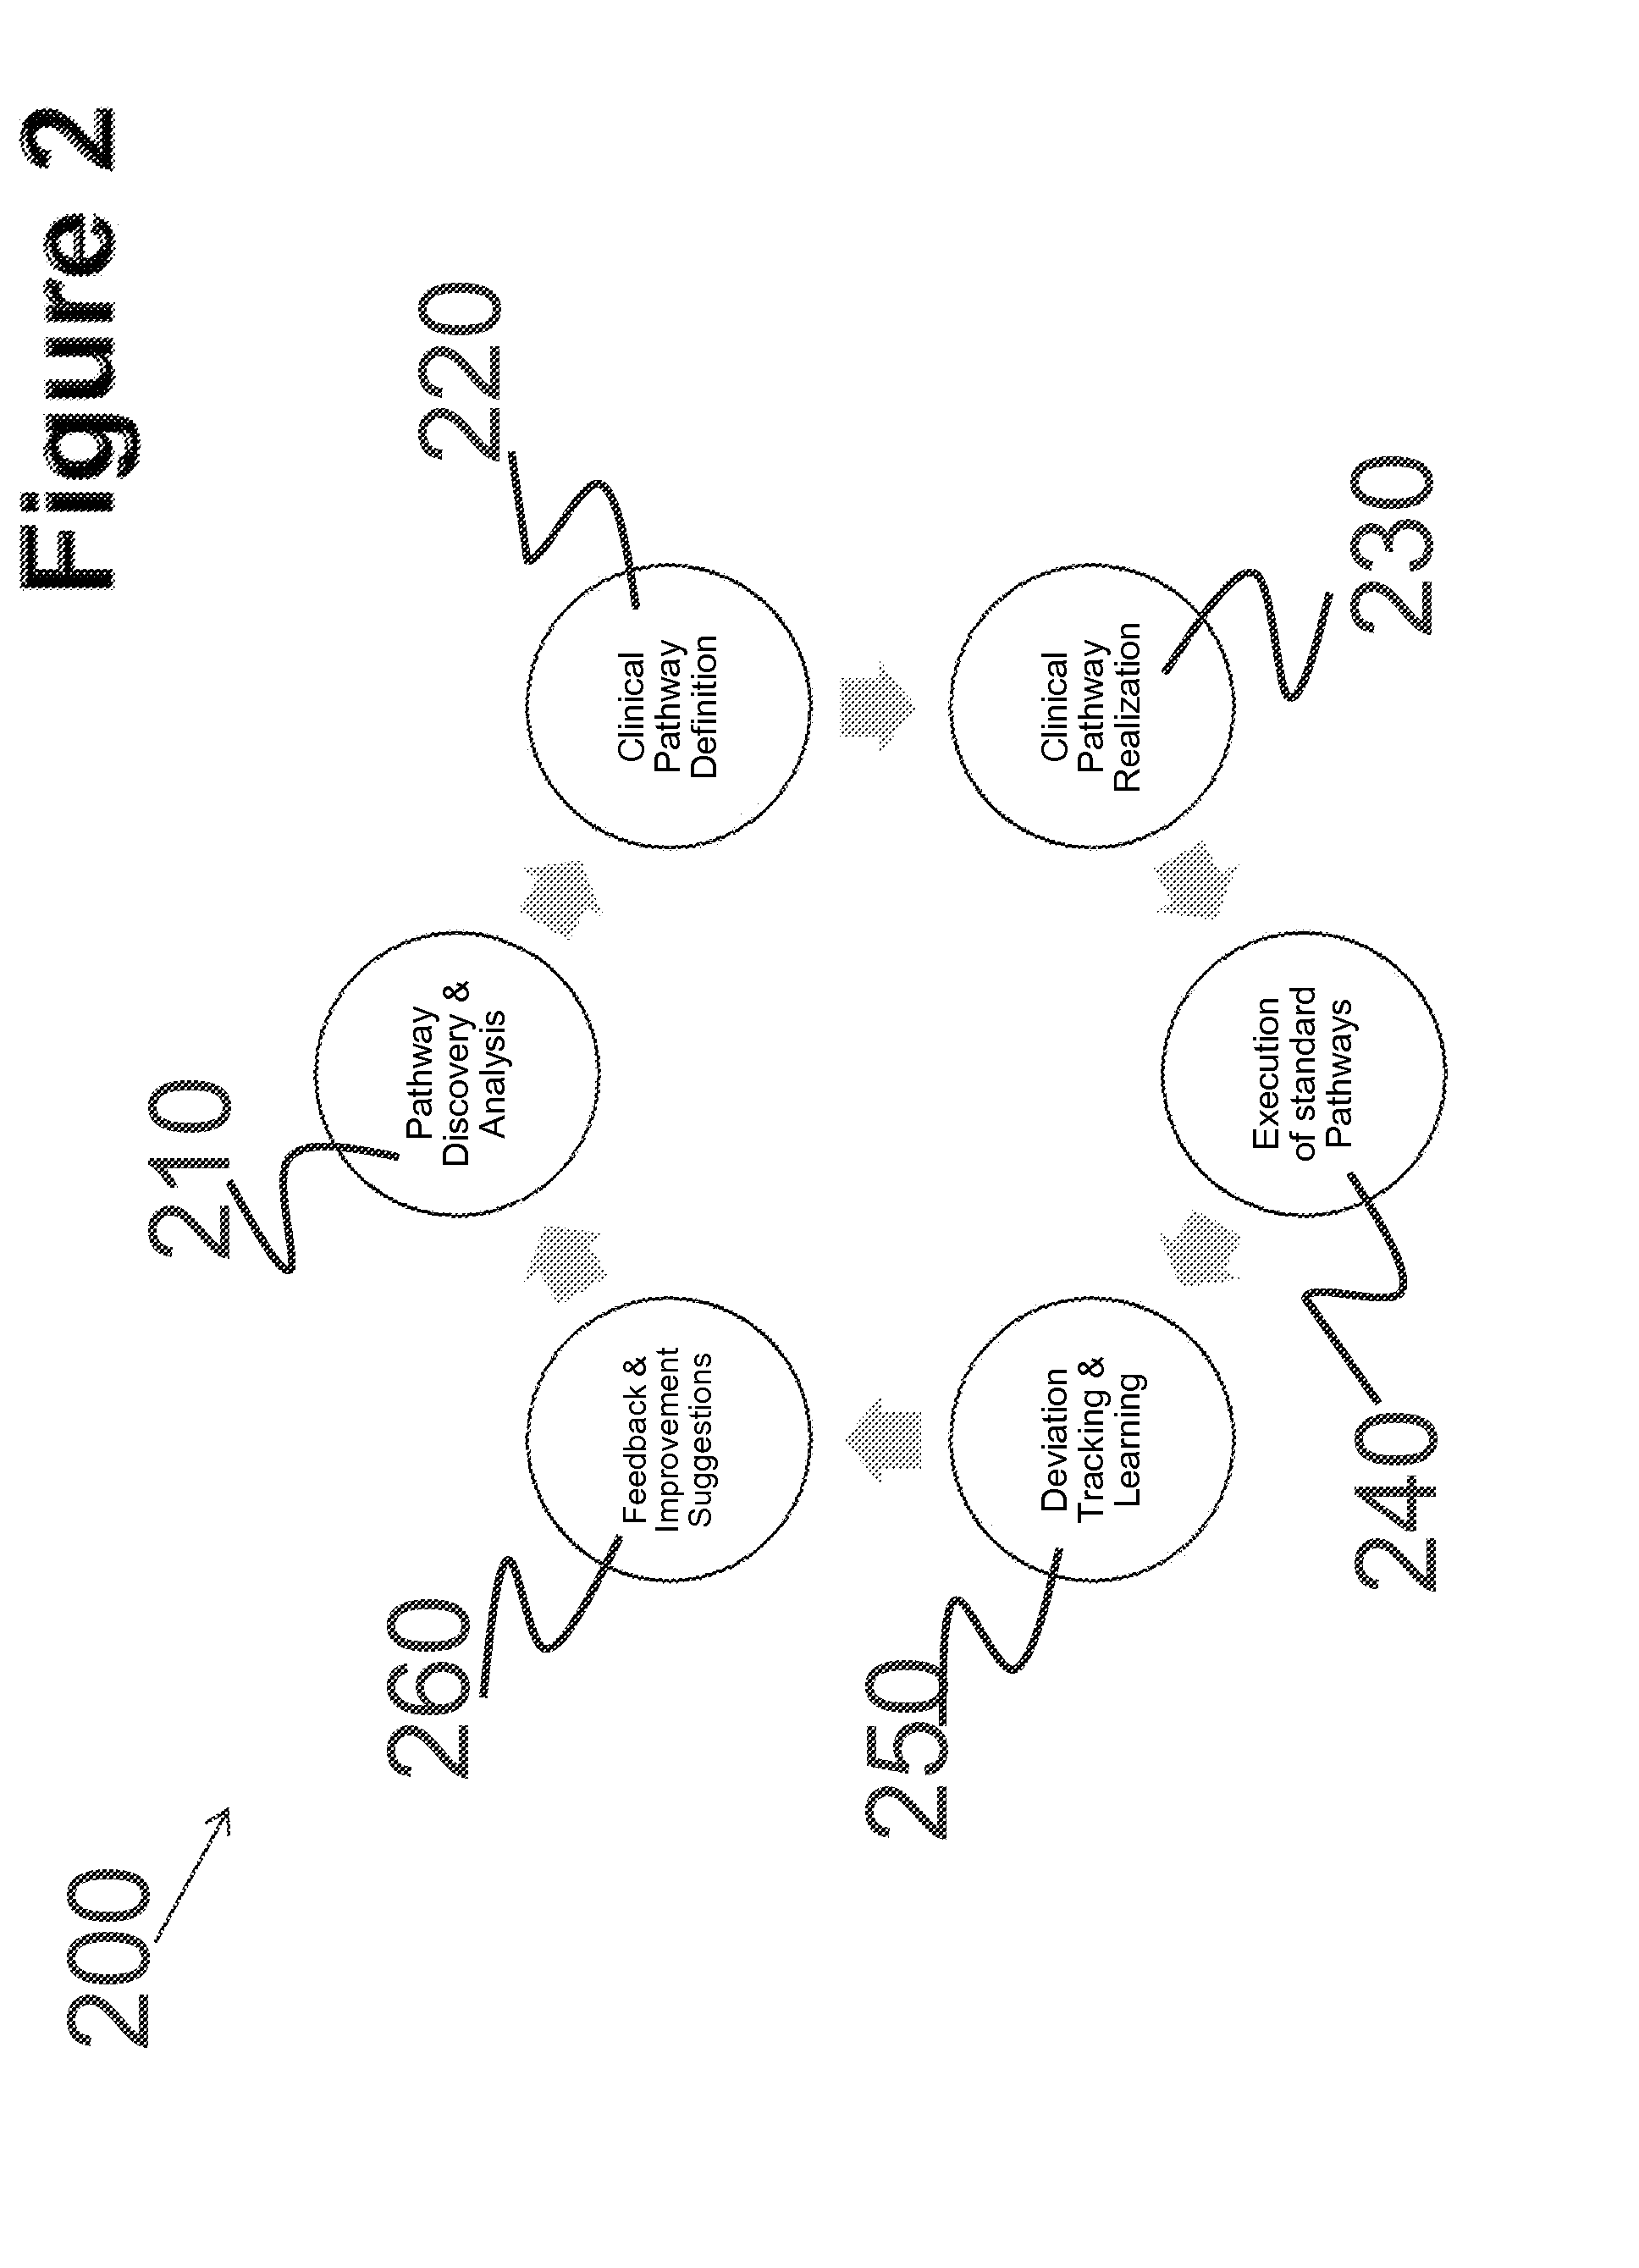 Method and system for discovery and continuous improvement of clinical pathways